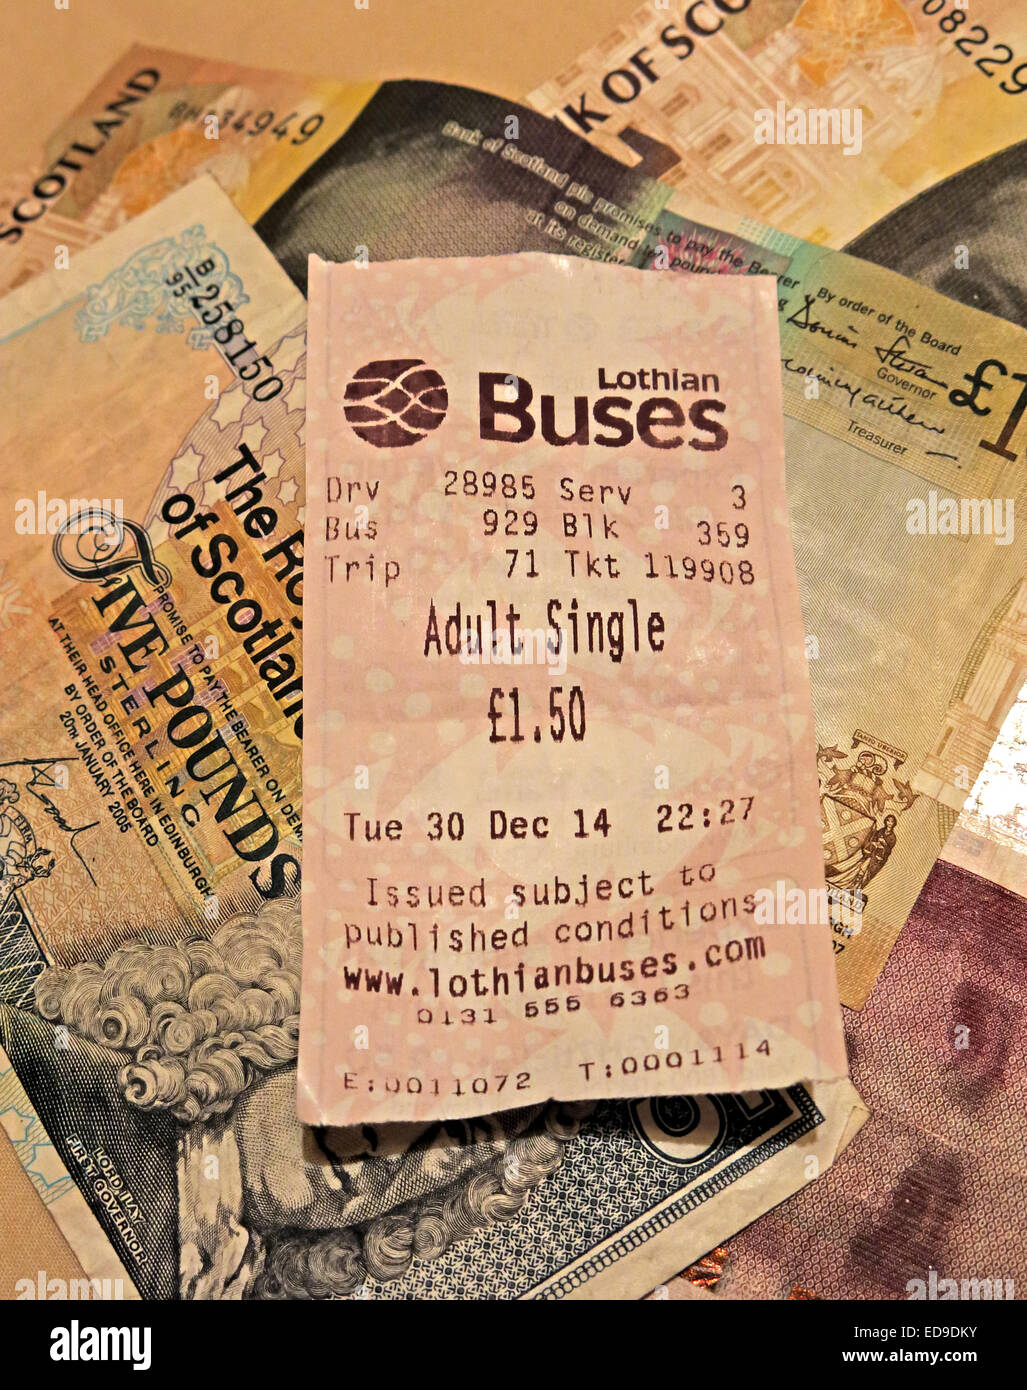 Lothian Buses bus Ticket and Scots banknotes from Edinburgh, Scotland, UK portrait format Stock Photo